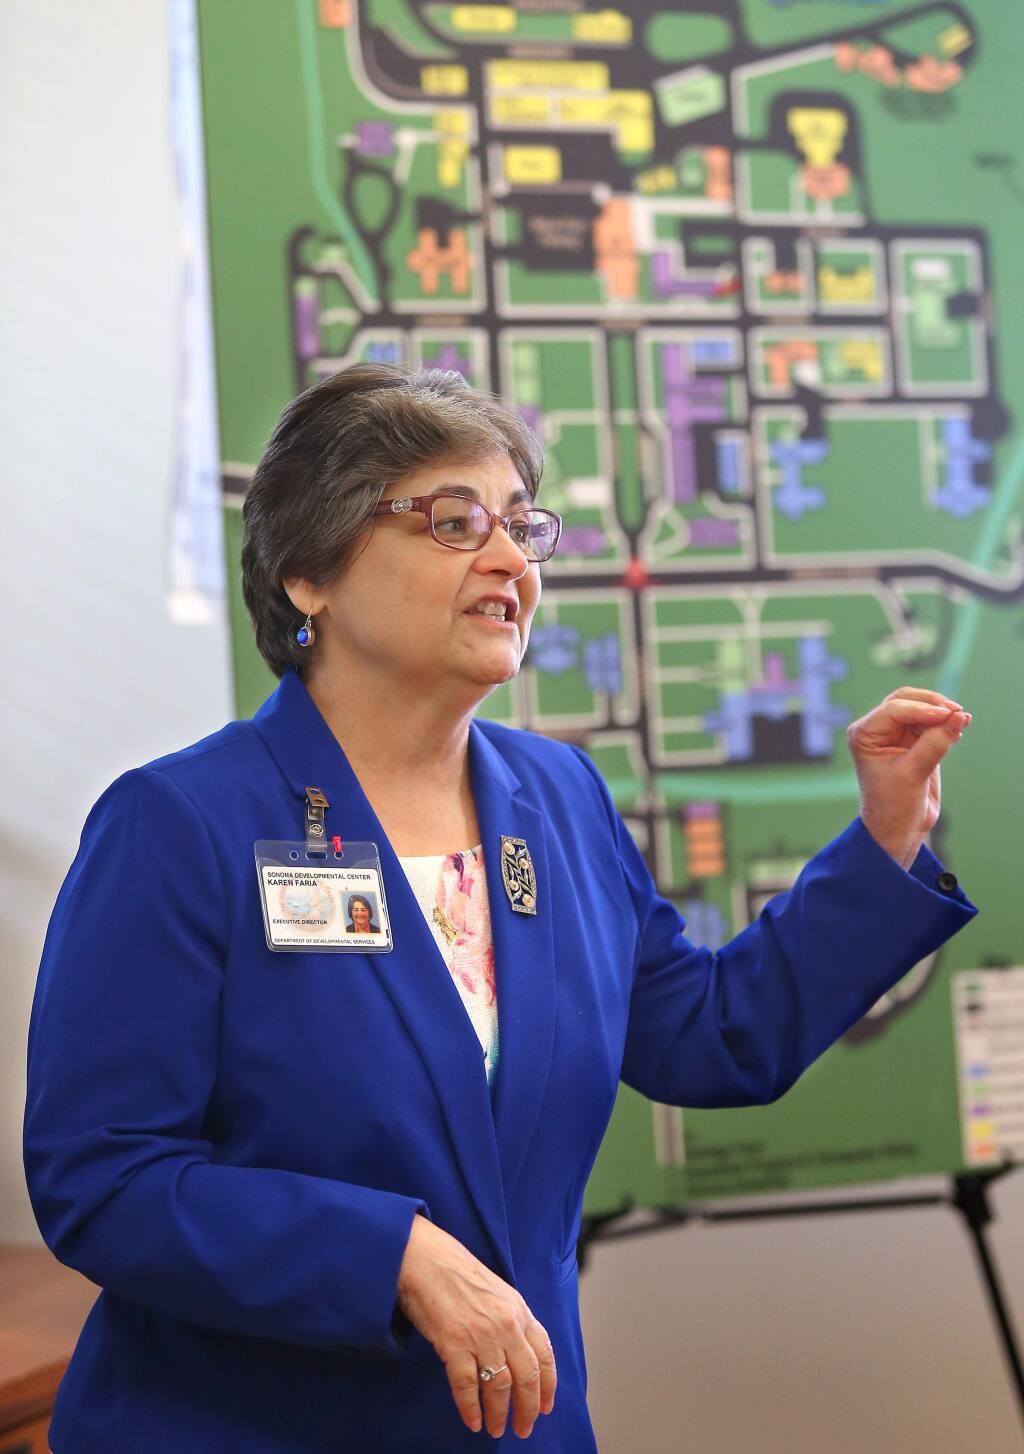 Sonoma Developmental Center executive director Karen Faria speaks to journalists before a tour of the facilities, on Monday, March 30, 2015. (Christopher Chung/ The Press Democrat)